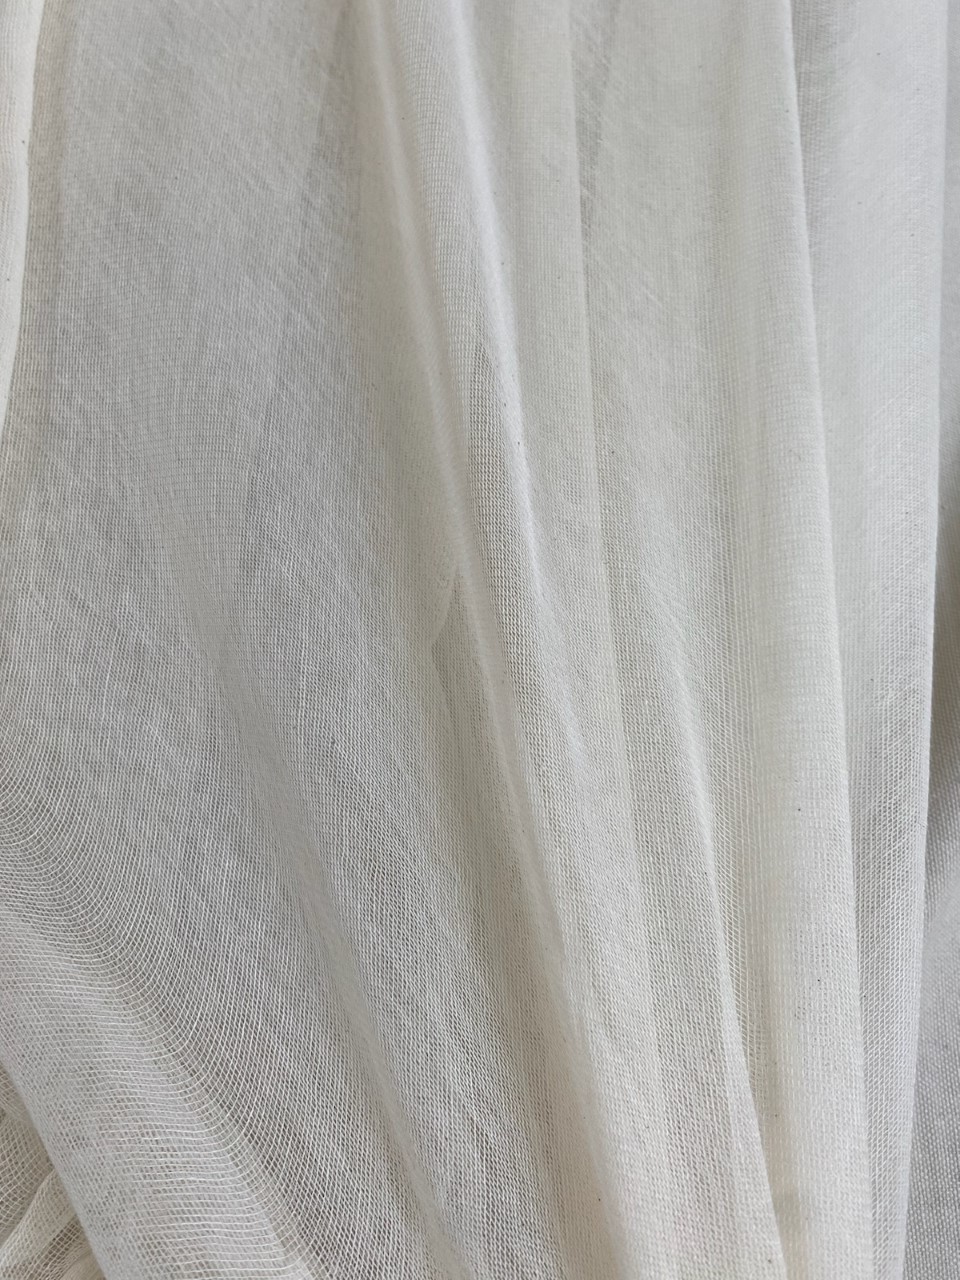 87" Wide Natural Grade 40 Cheesecloth - 2 Yards